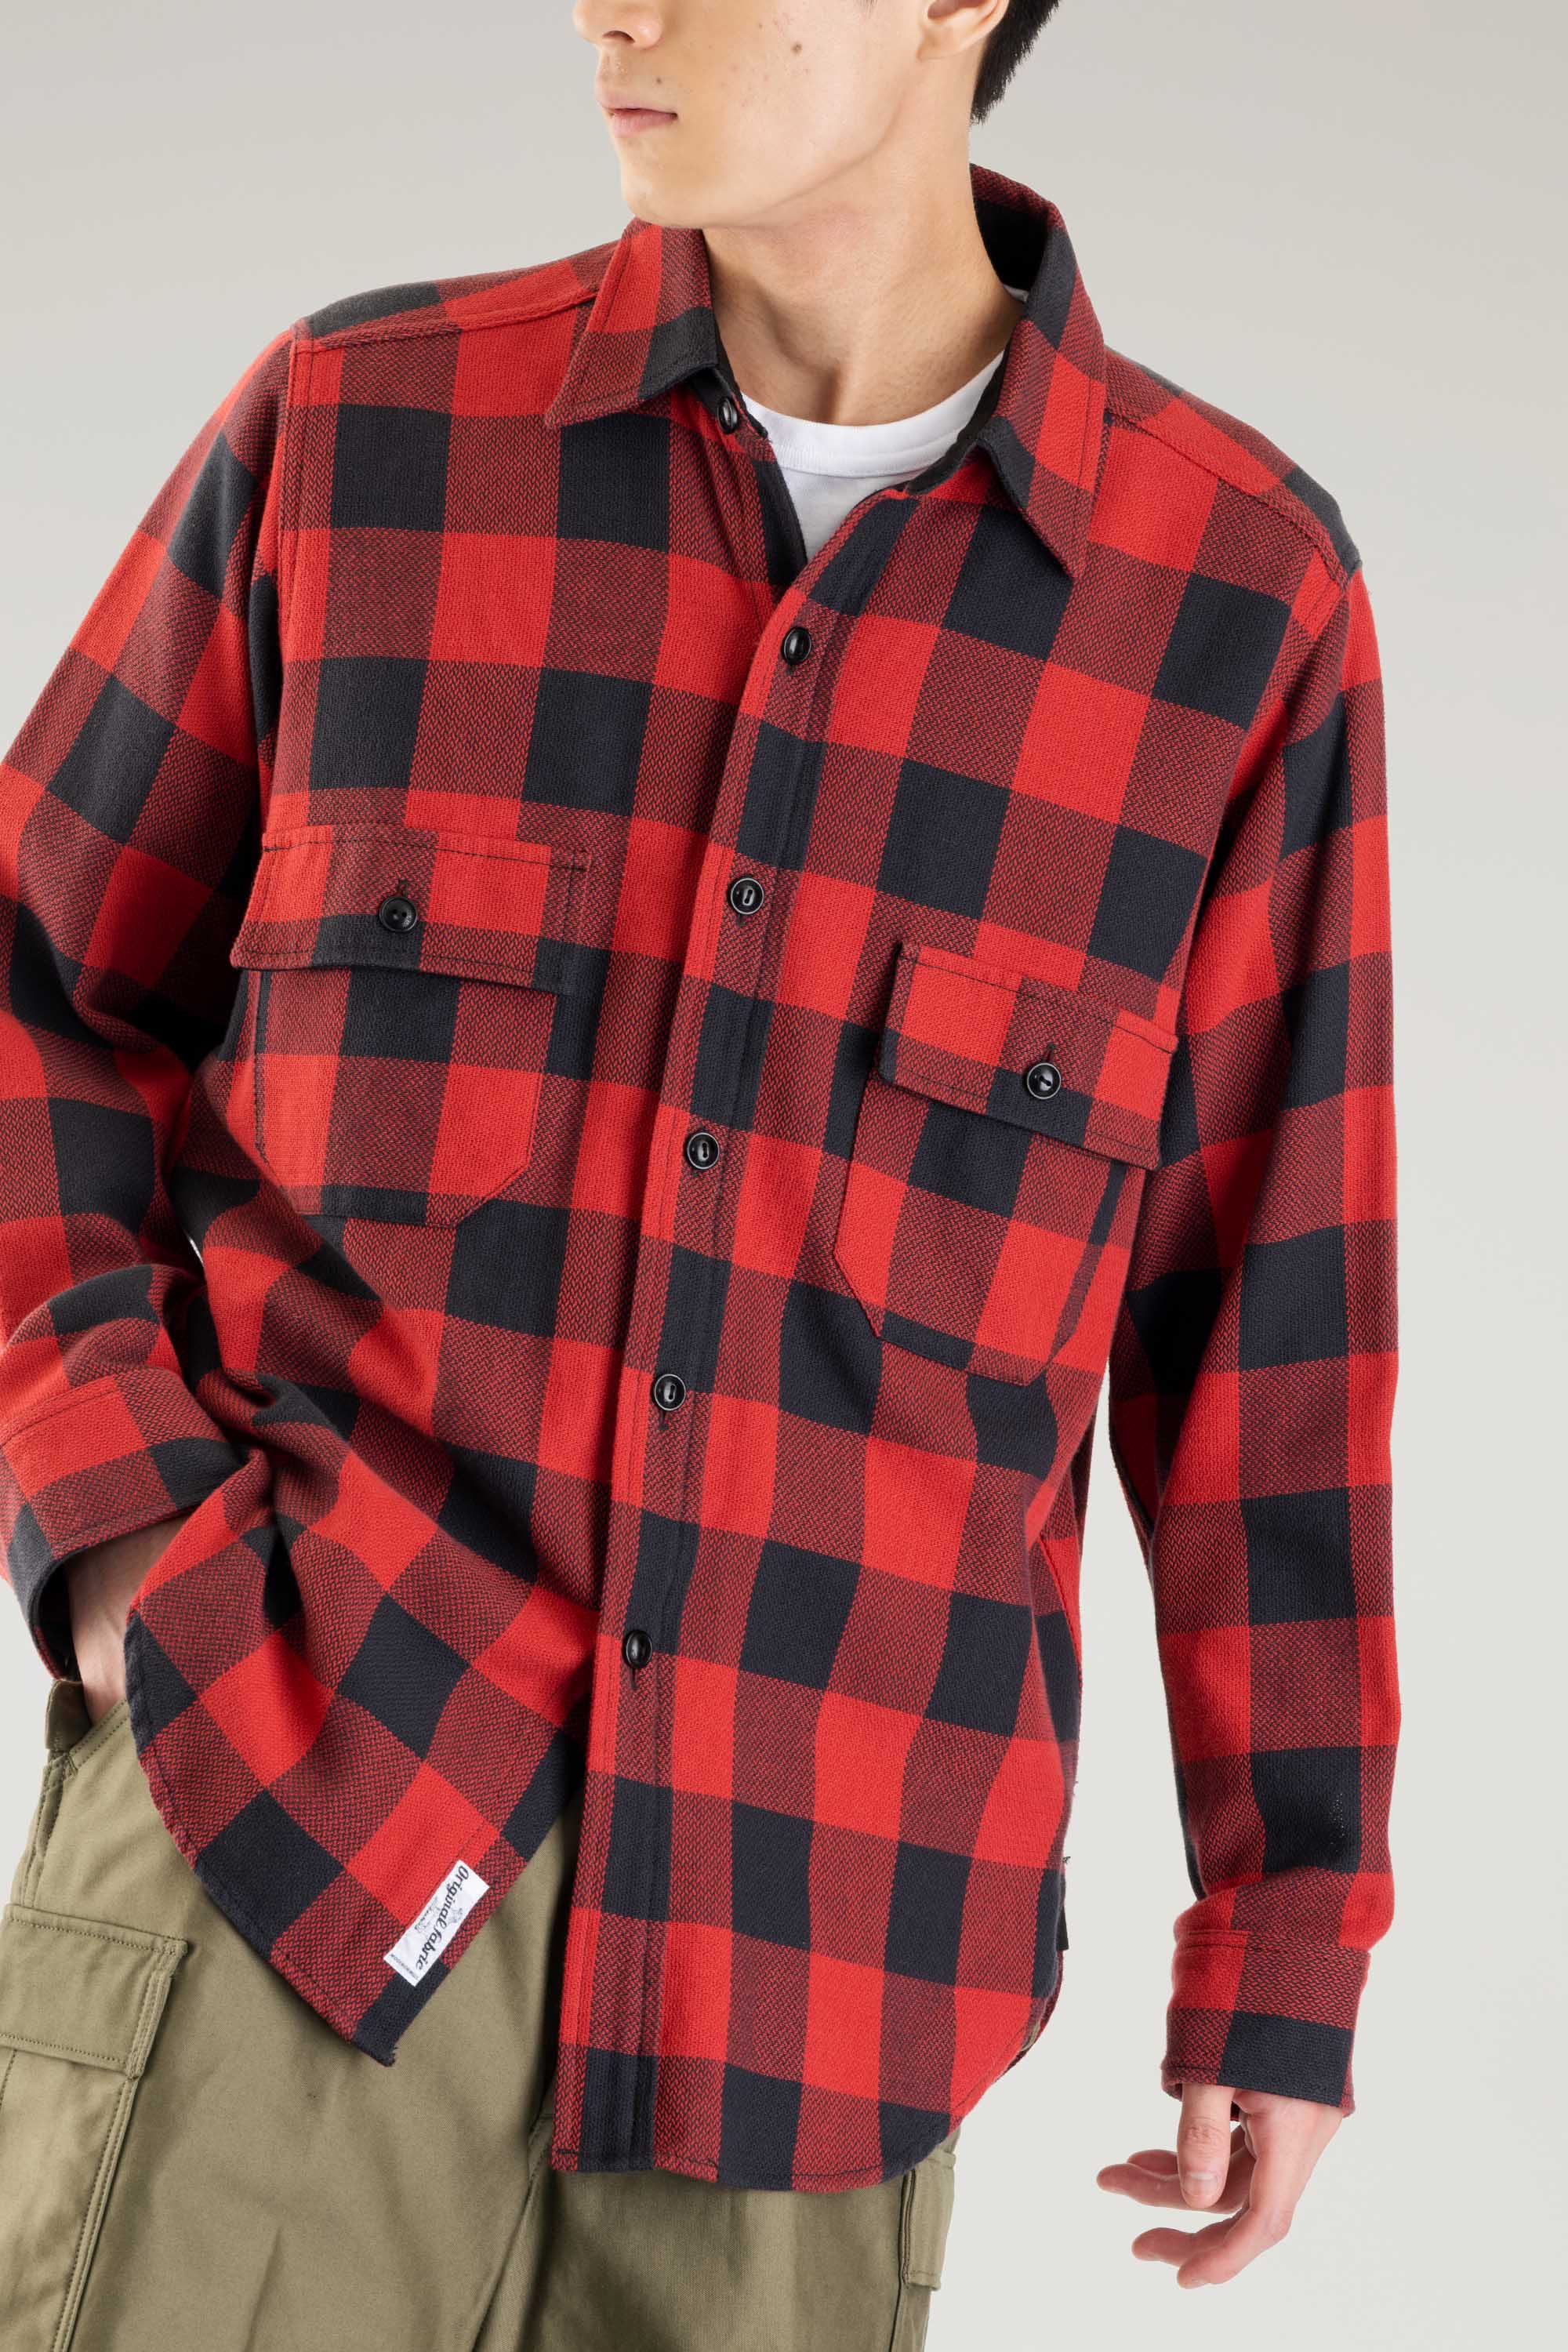 WOOLRICH AUTHENTIC FLANNEL SHIRT ウールリッチ